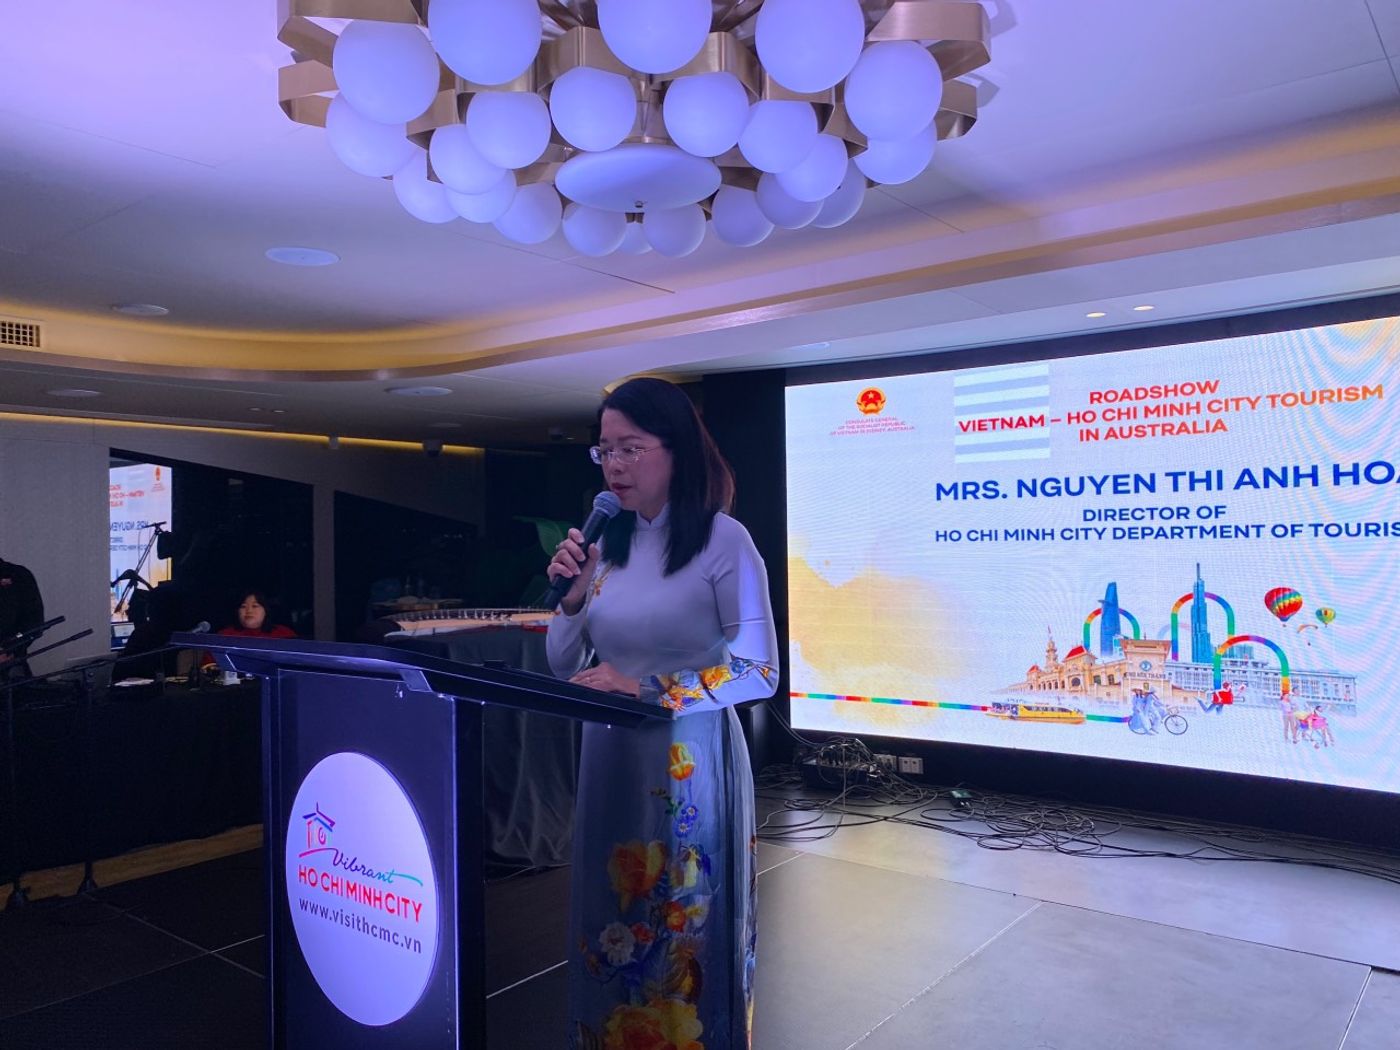 Opening remark by Ms. Nguyen Thi Anh Hoa, Director of Ho Chi Minh City Tourism Department